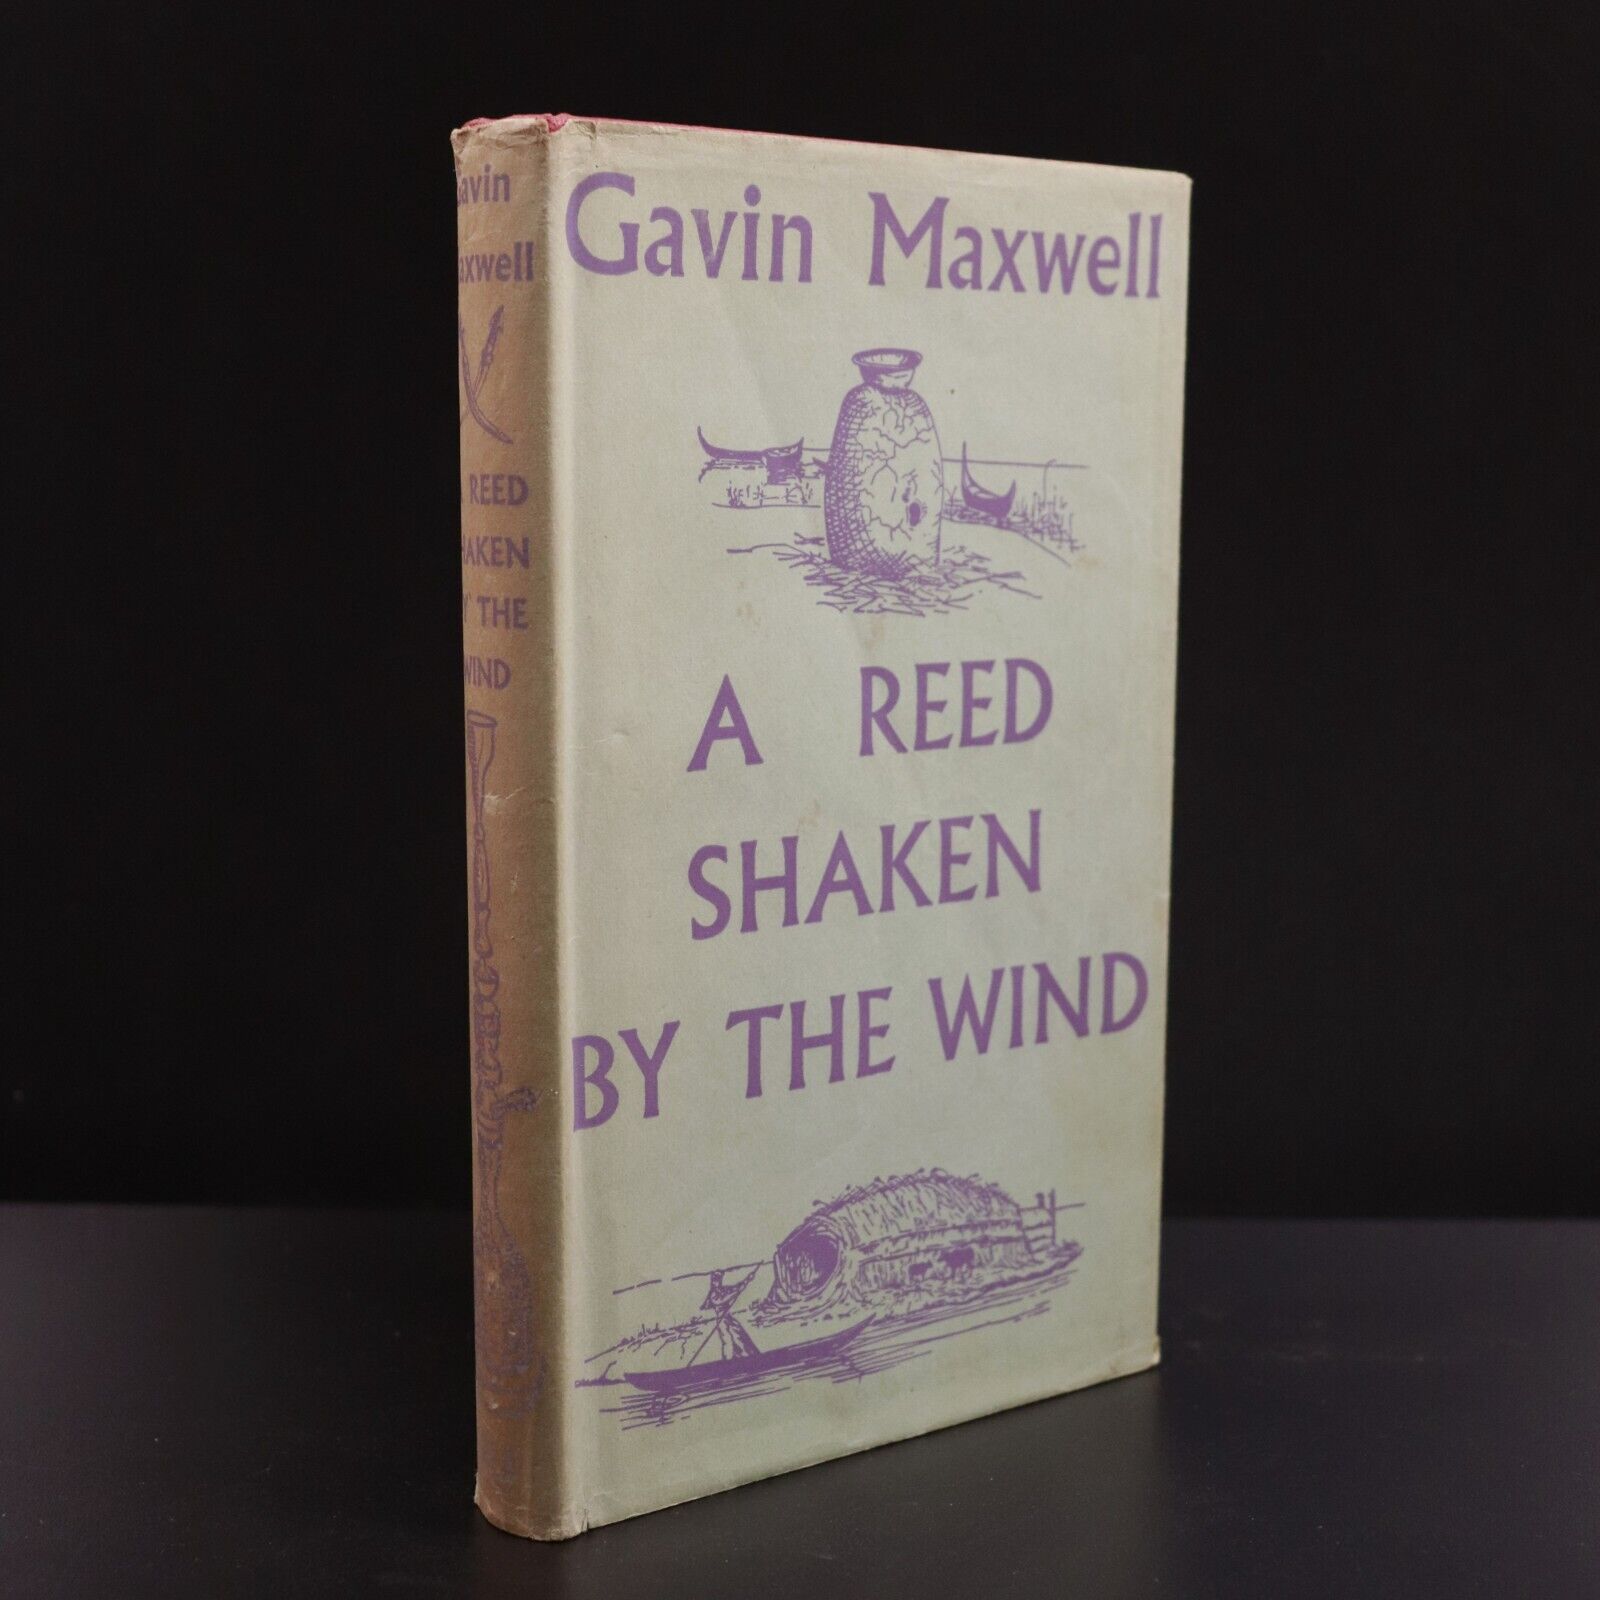 1959 A Reed Shaken By The Wind by Gavin Maxwell Natural History Book